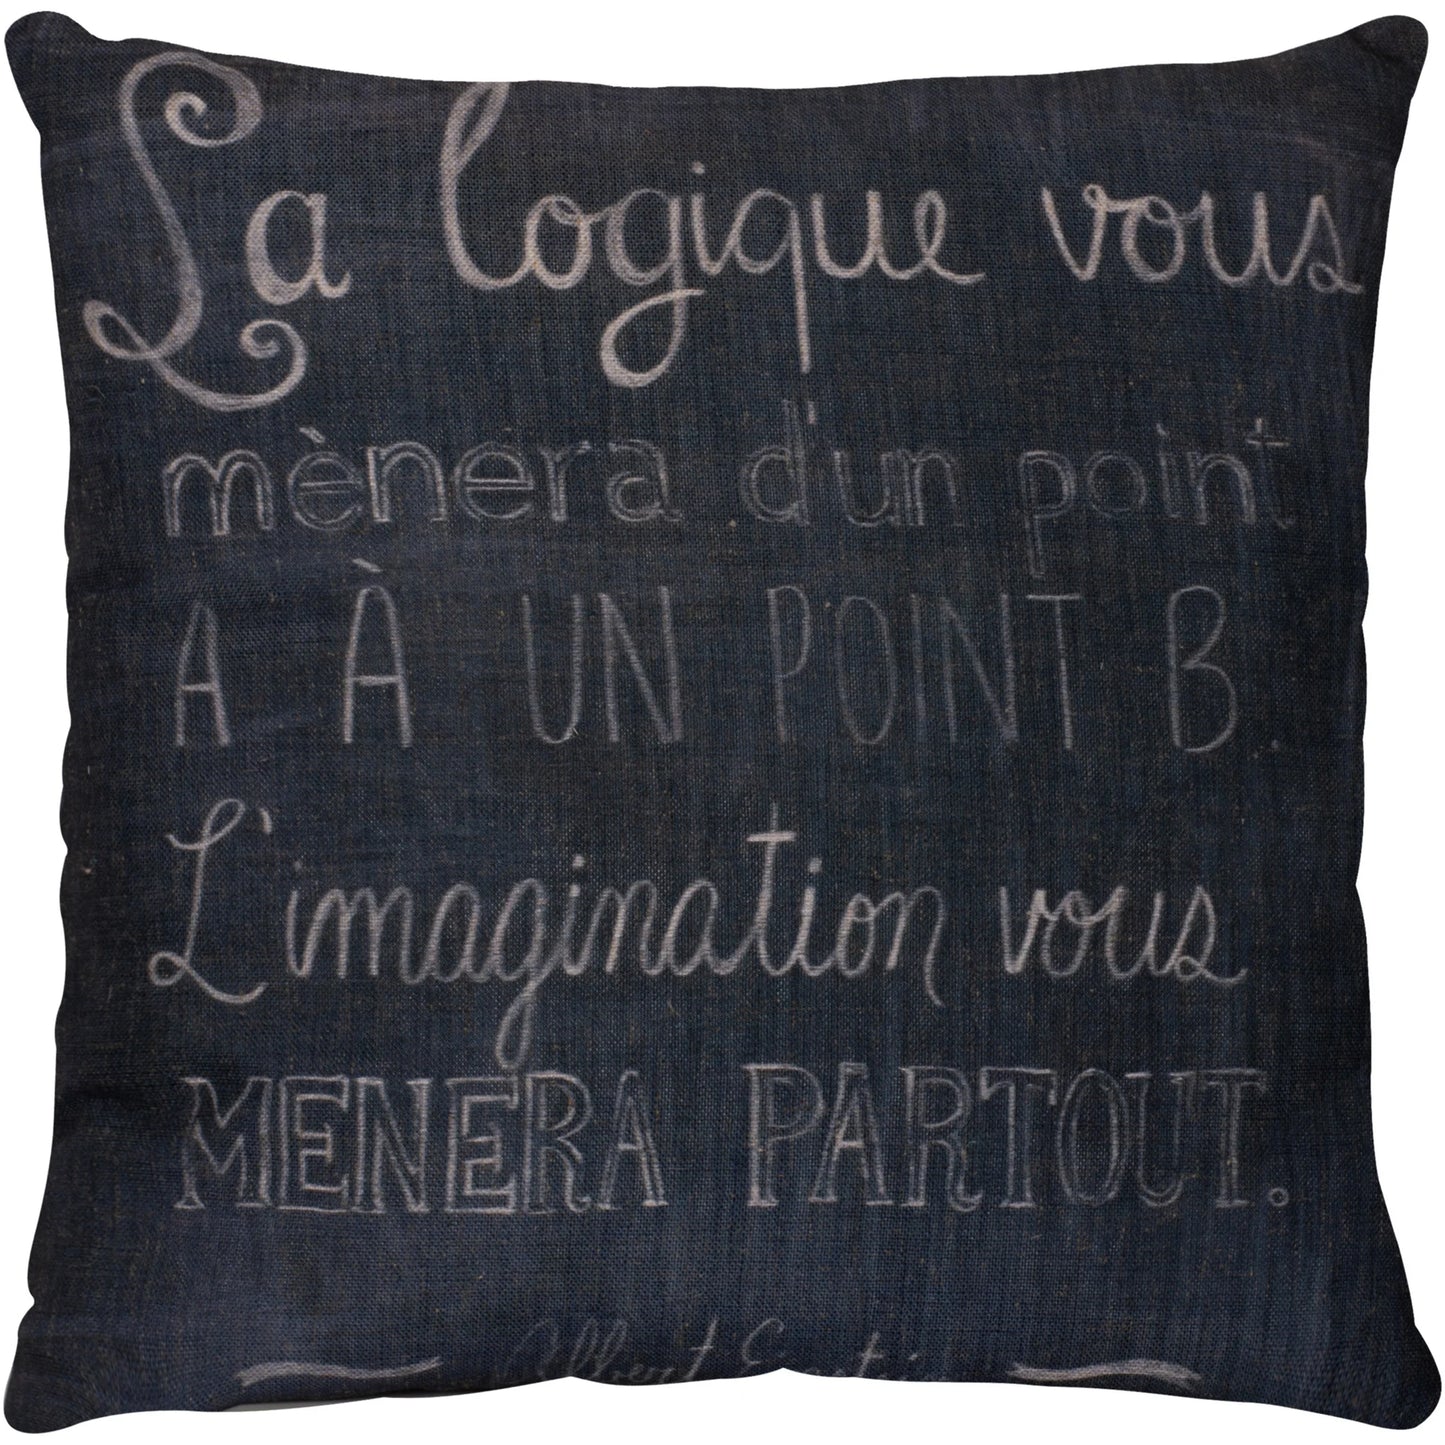 Decorative Pillow - Curated Home Decor